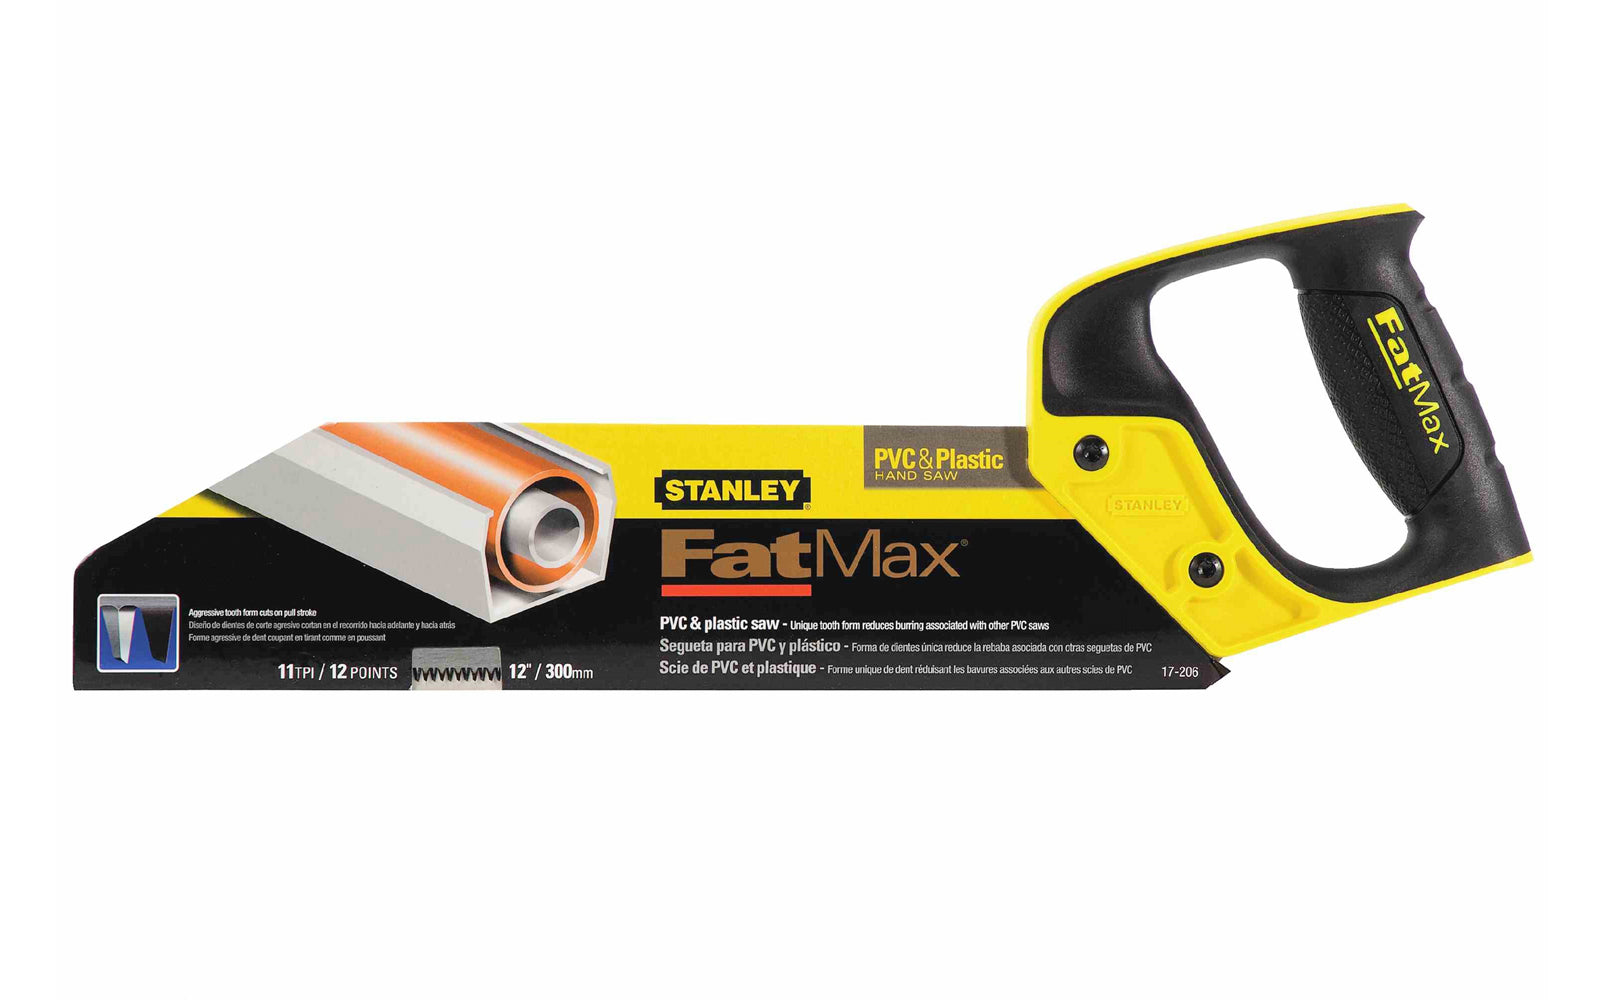 Stanley Fatmax 12" PVC & Plastic Handsaw - 13 TPI ~ 17-206 - Good for cutting PVC & plastics, it is also a good utility saw for other wood types including plywood, hardwoods, fine finish